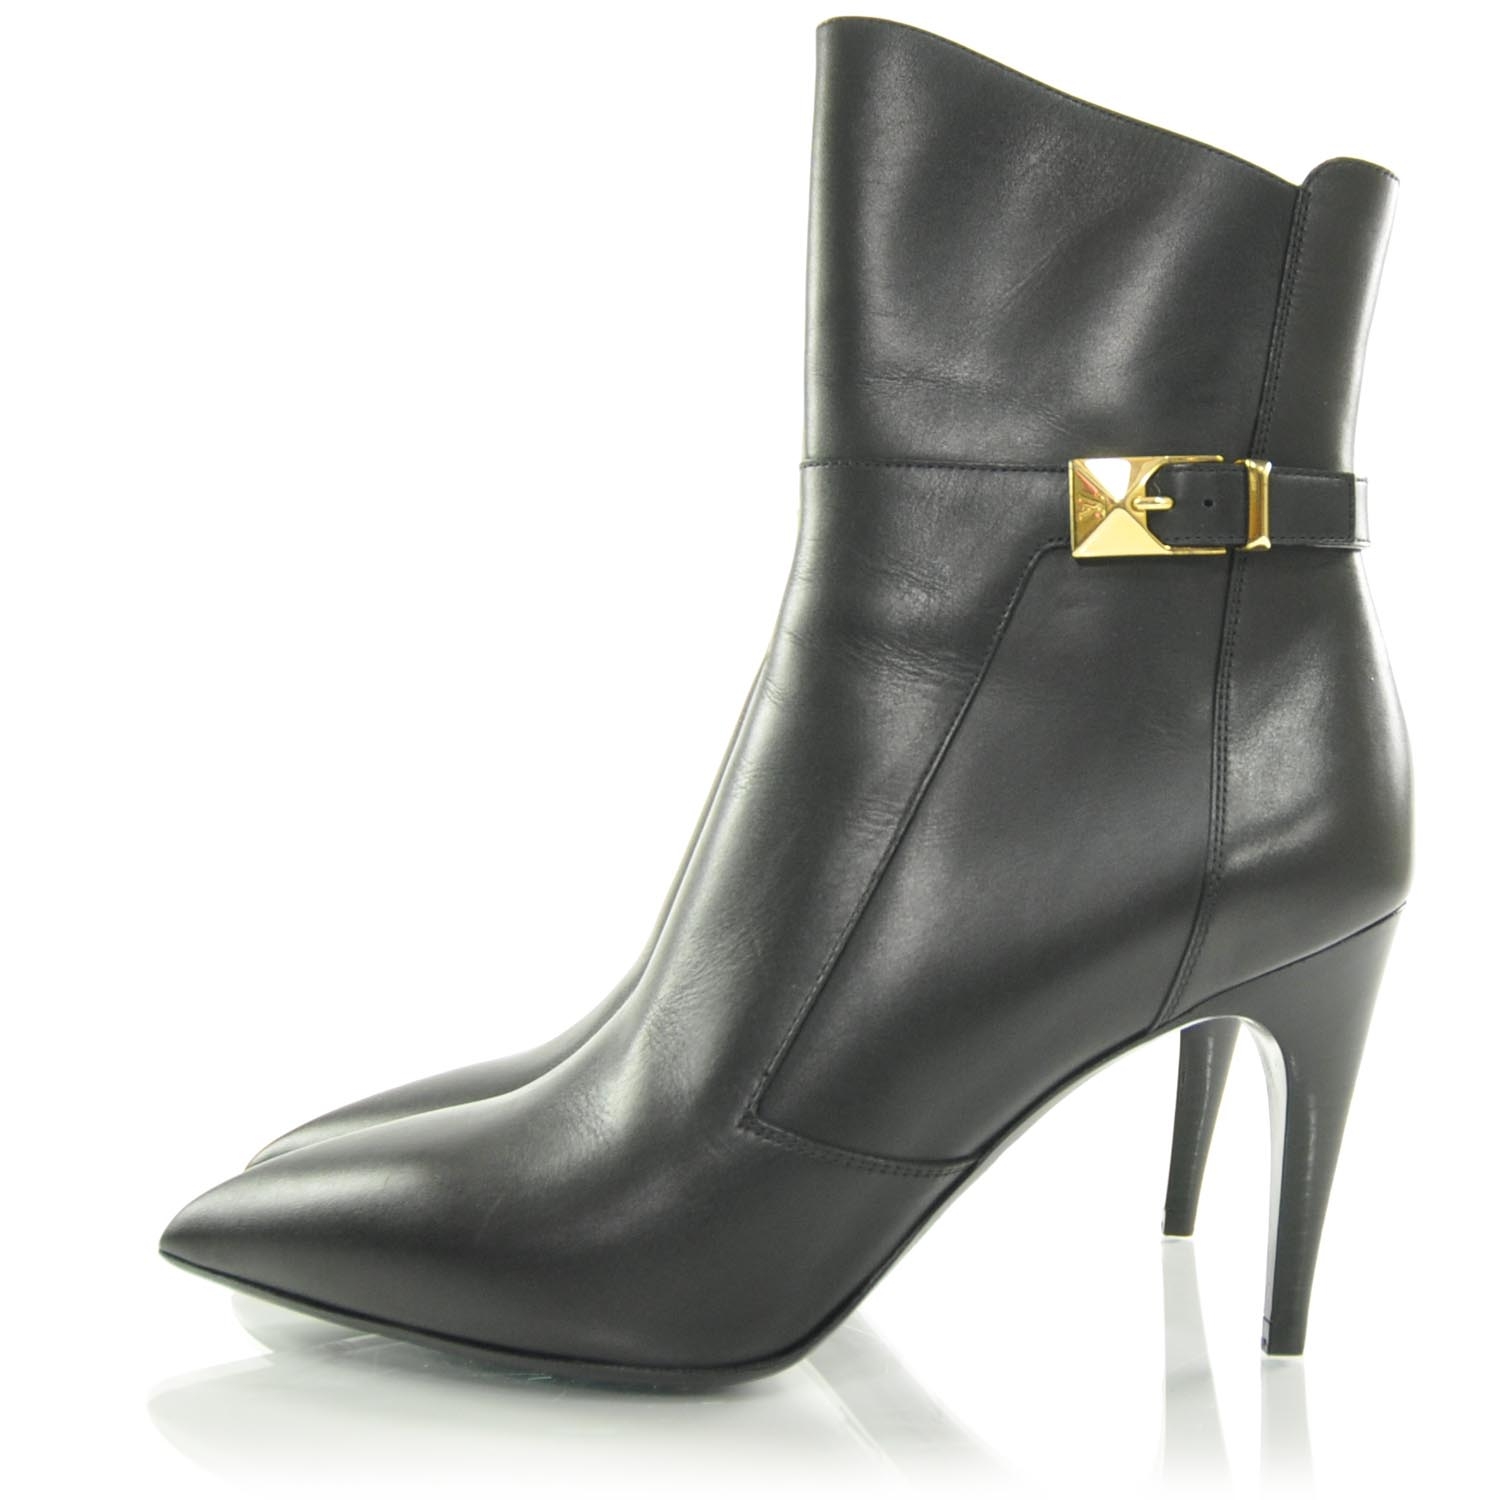 LOUIS VUITTON Leather Black High Heel Ankle Boots 38 28281